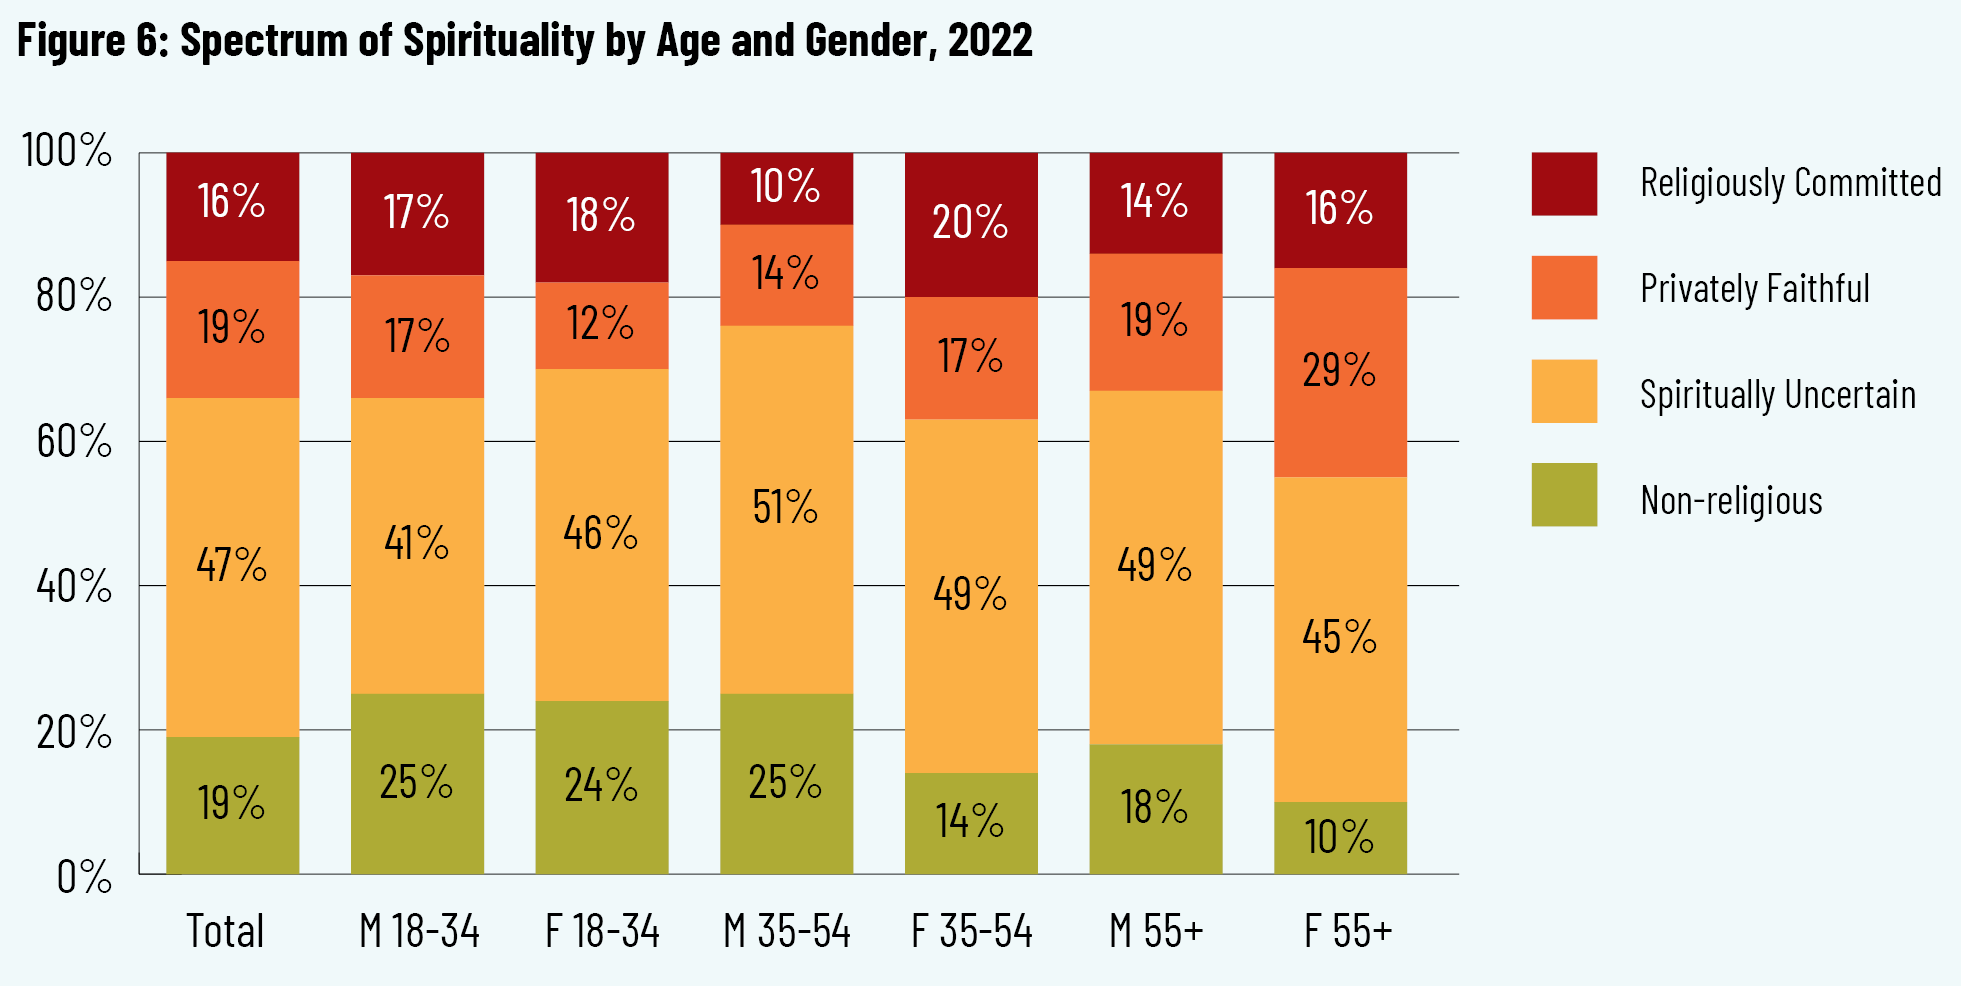 Spectrum of Spirituality by Age and Gender, 2017 to 2022